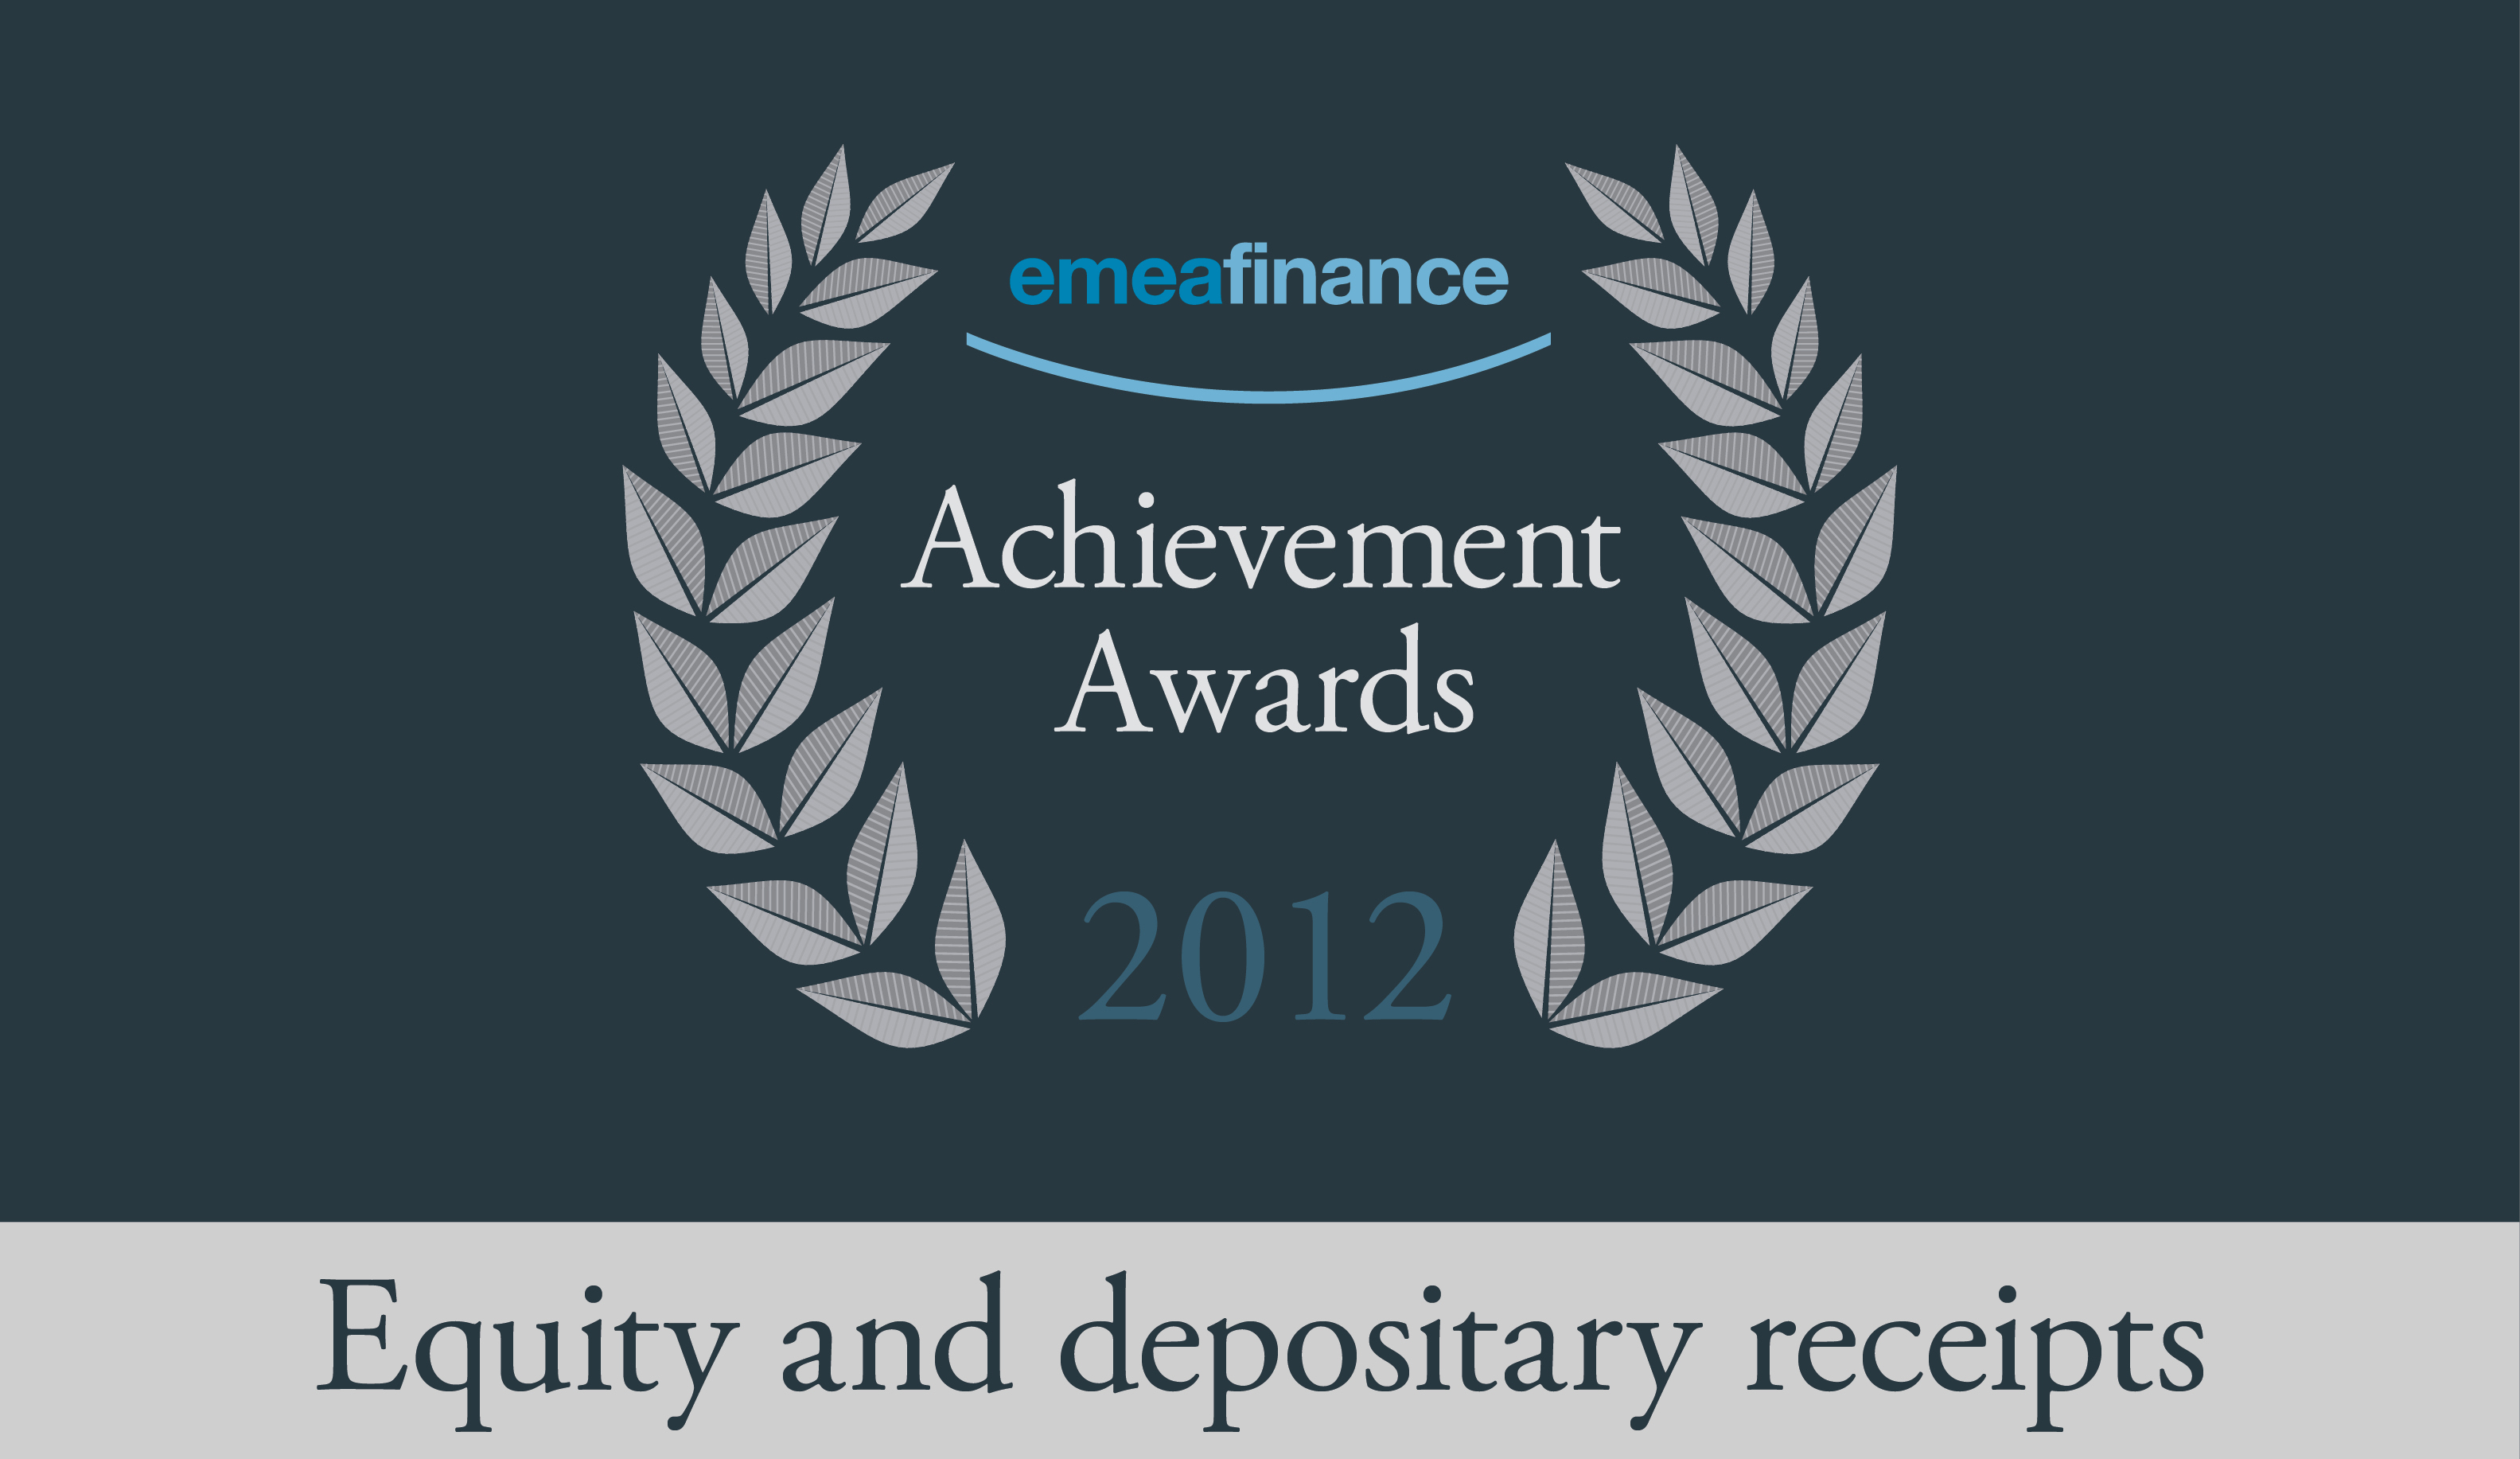 Achievement Awards 2012: Equity markets and depositary receipts